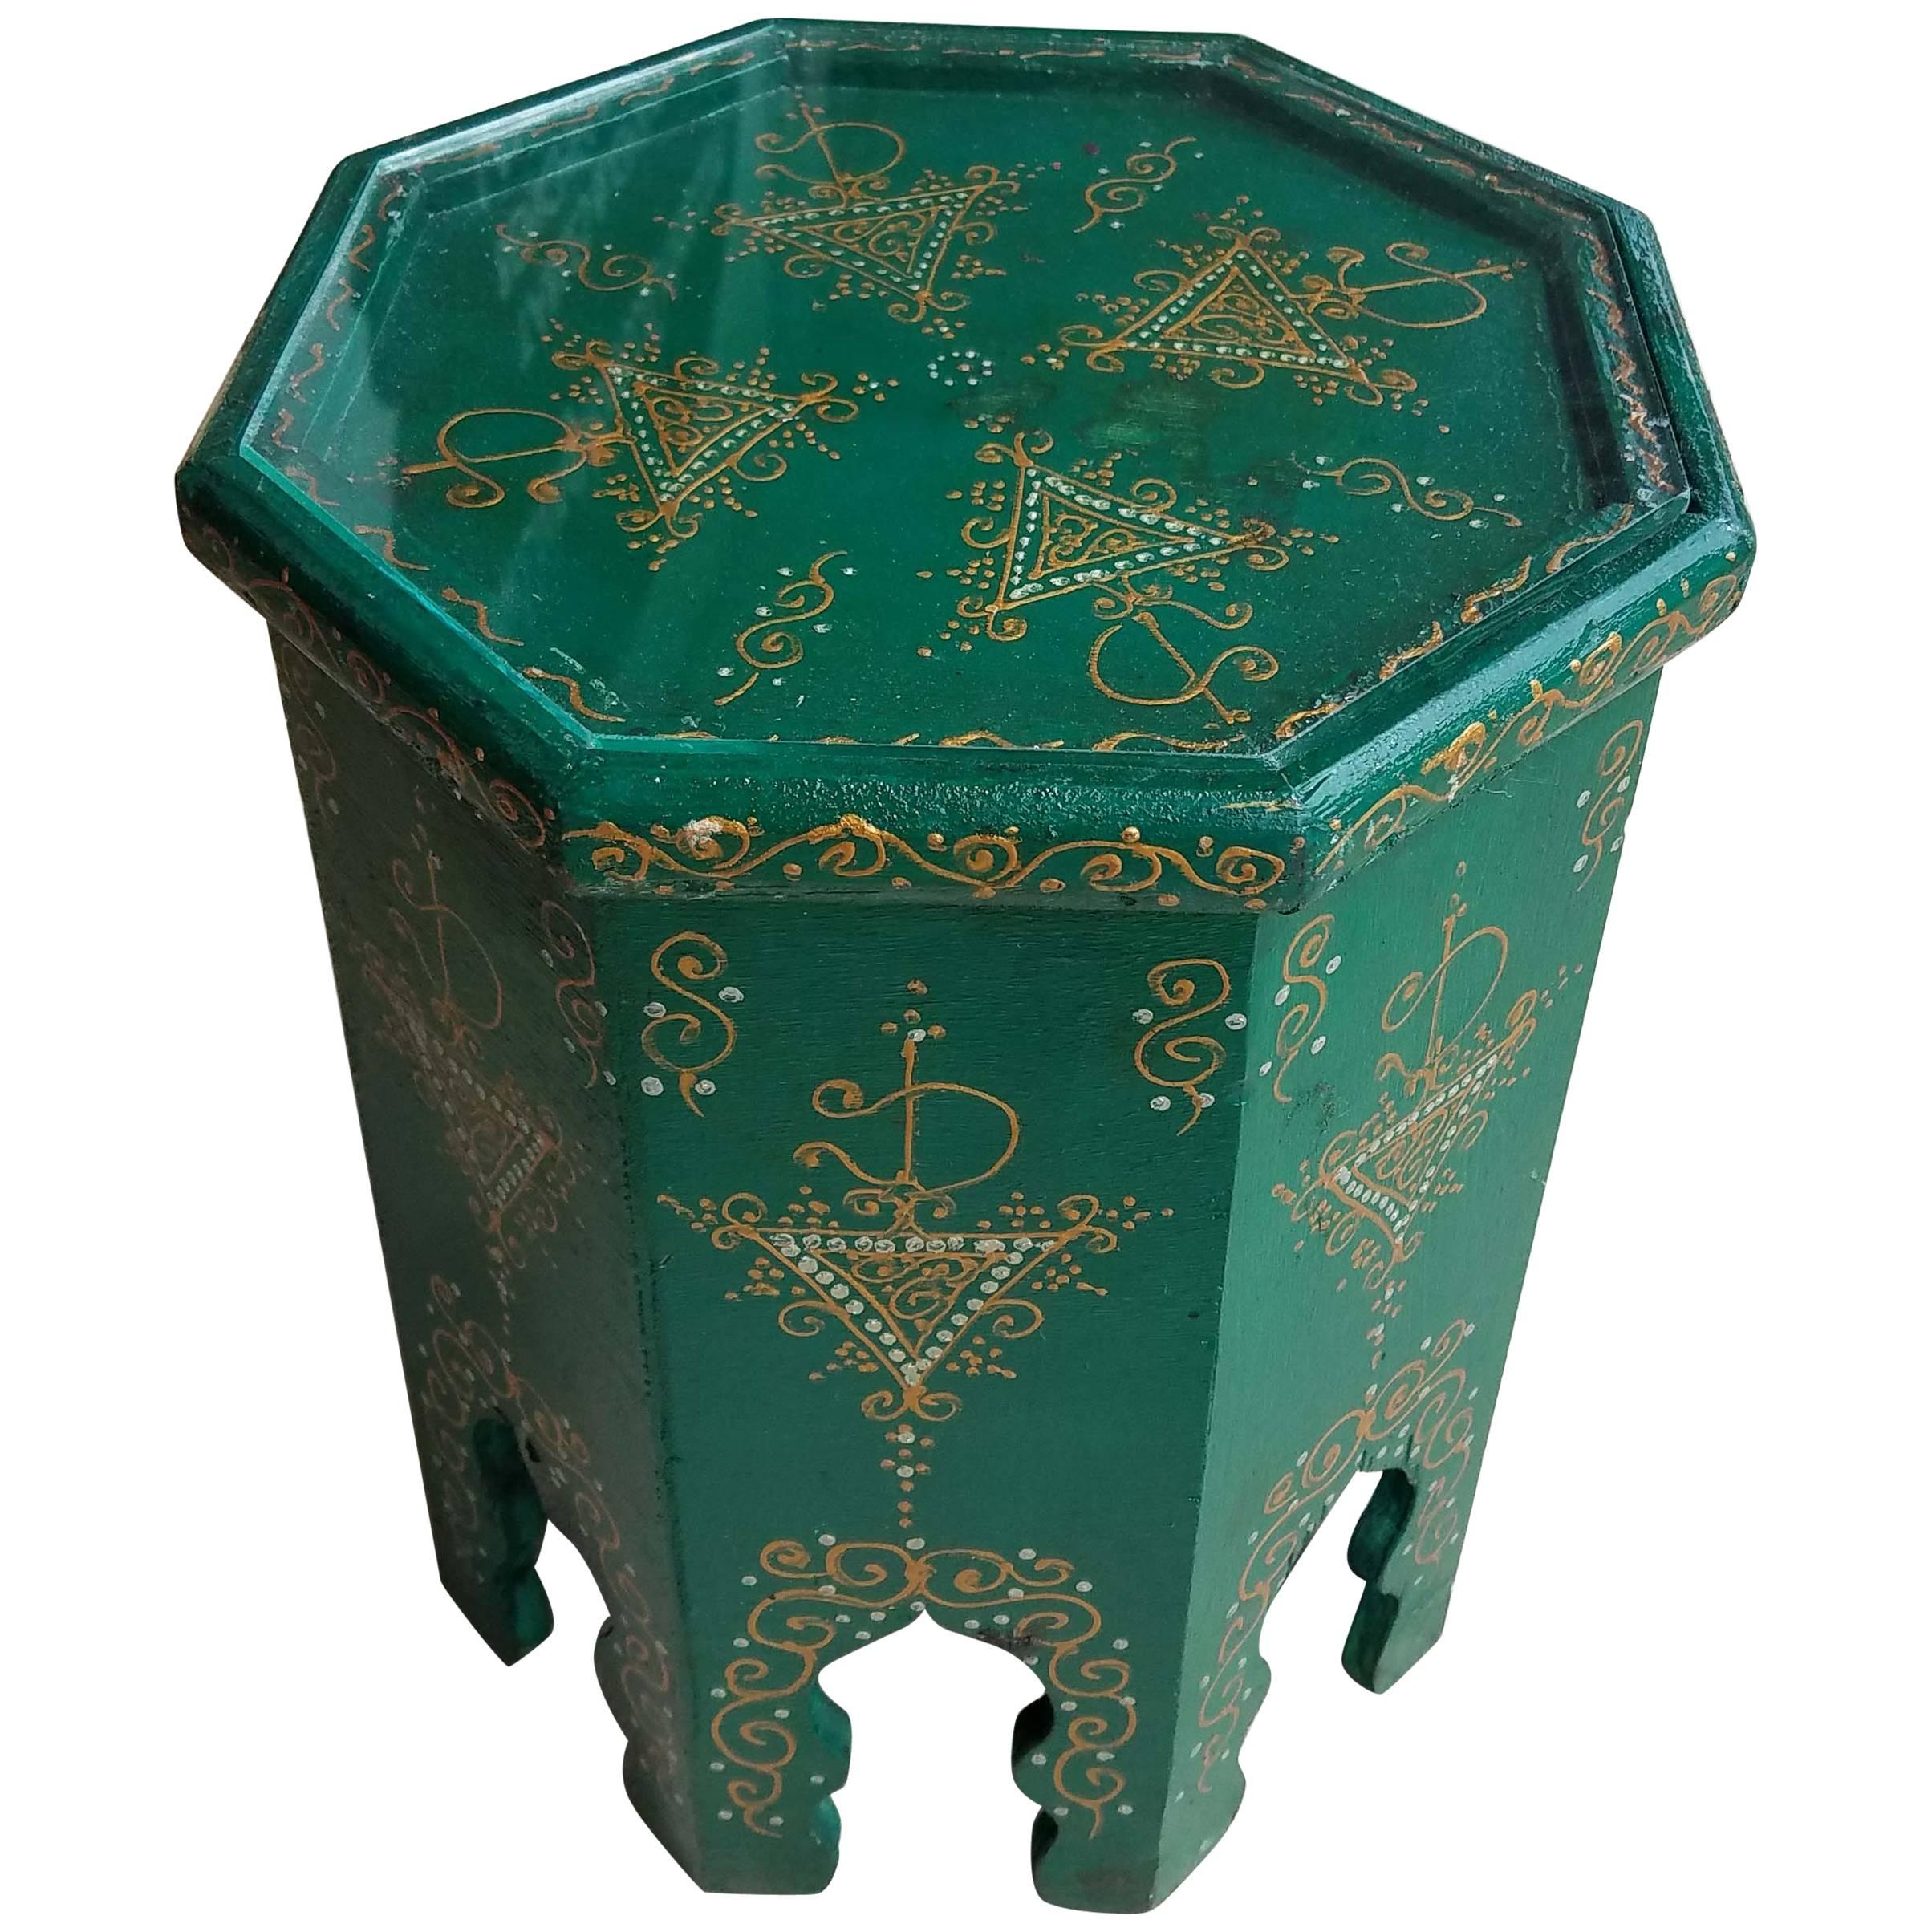 Small Hexagonal Moroccan Hand-Painted Side Table in Green